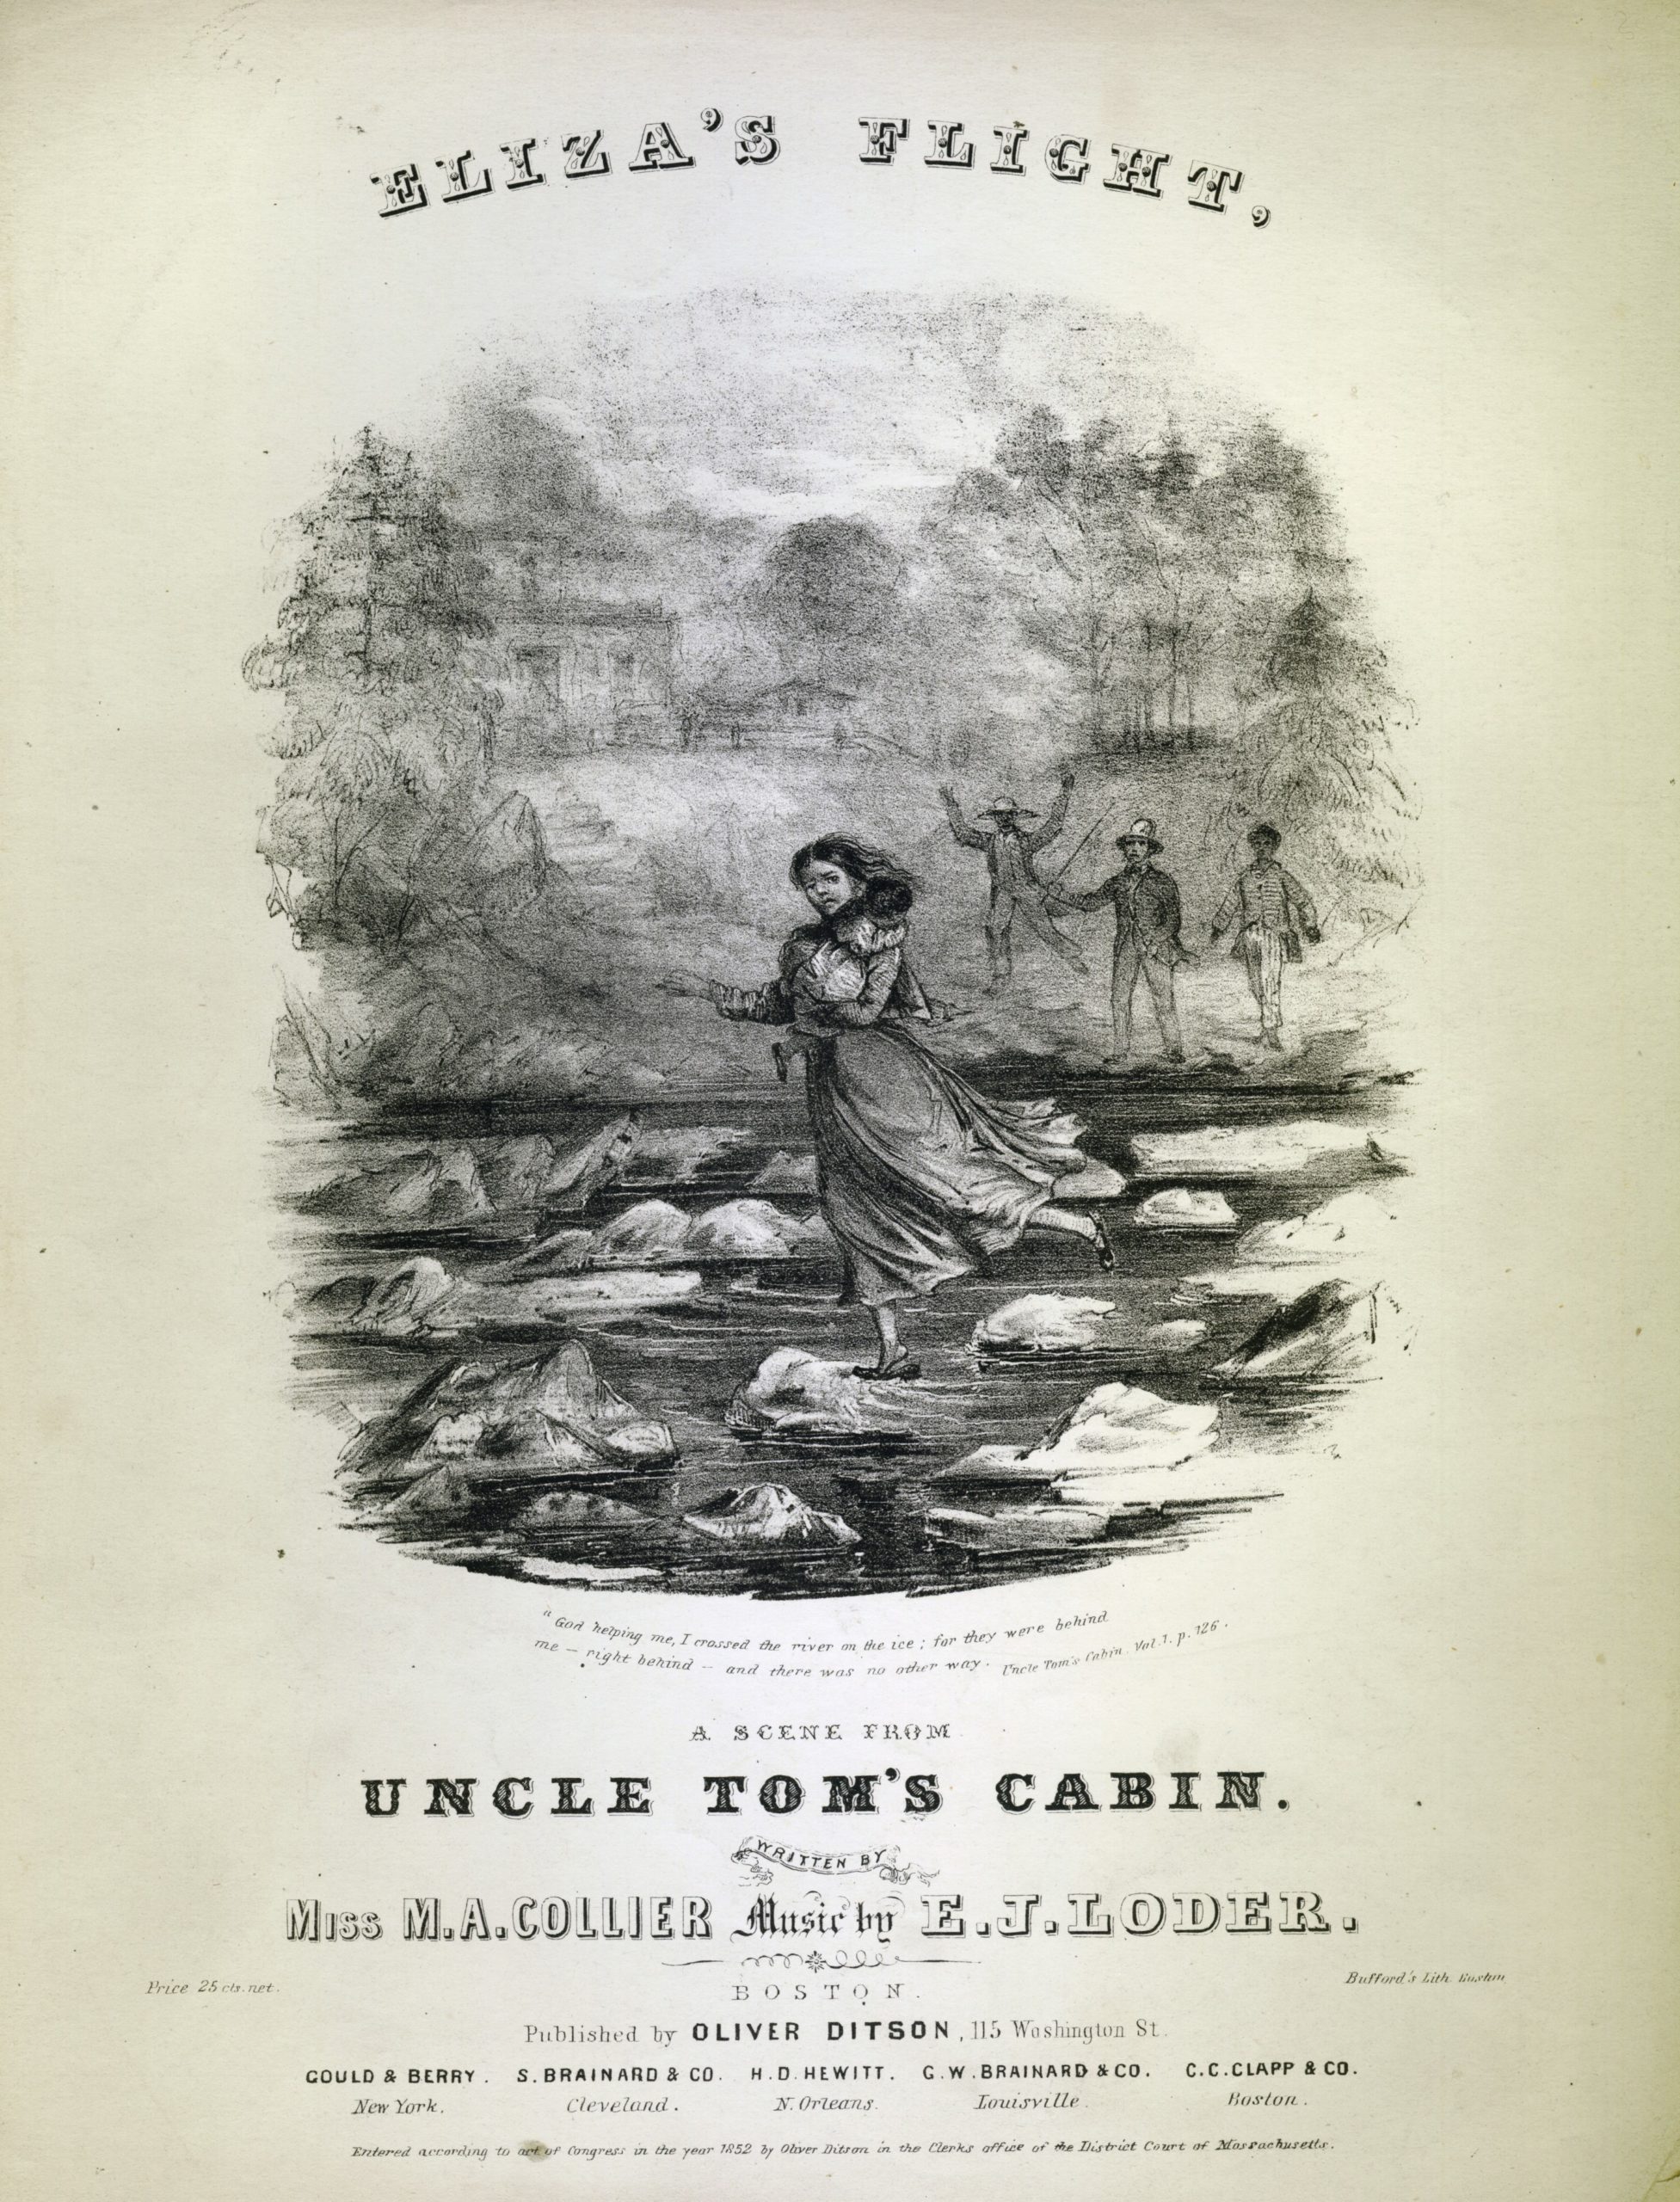 Eliza's Flight: A Scene from Uncle Tom's Cabin, 1852, from E.L. Loder and M.A. Collier, Eliza's Flight: A Scene From Uncle Tom's Cabin, Boston: Oliver Ditson (Newberry Library)